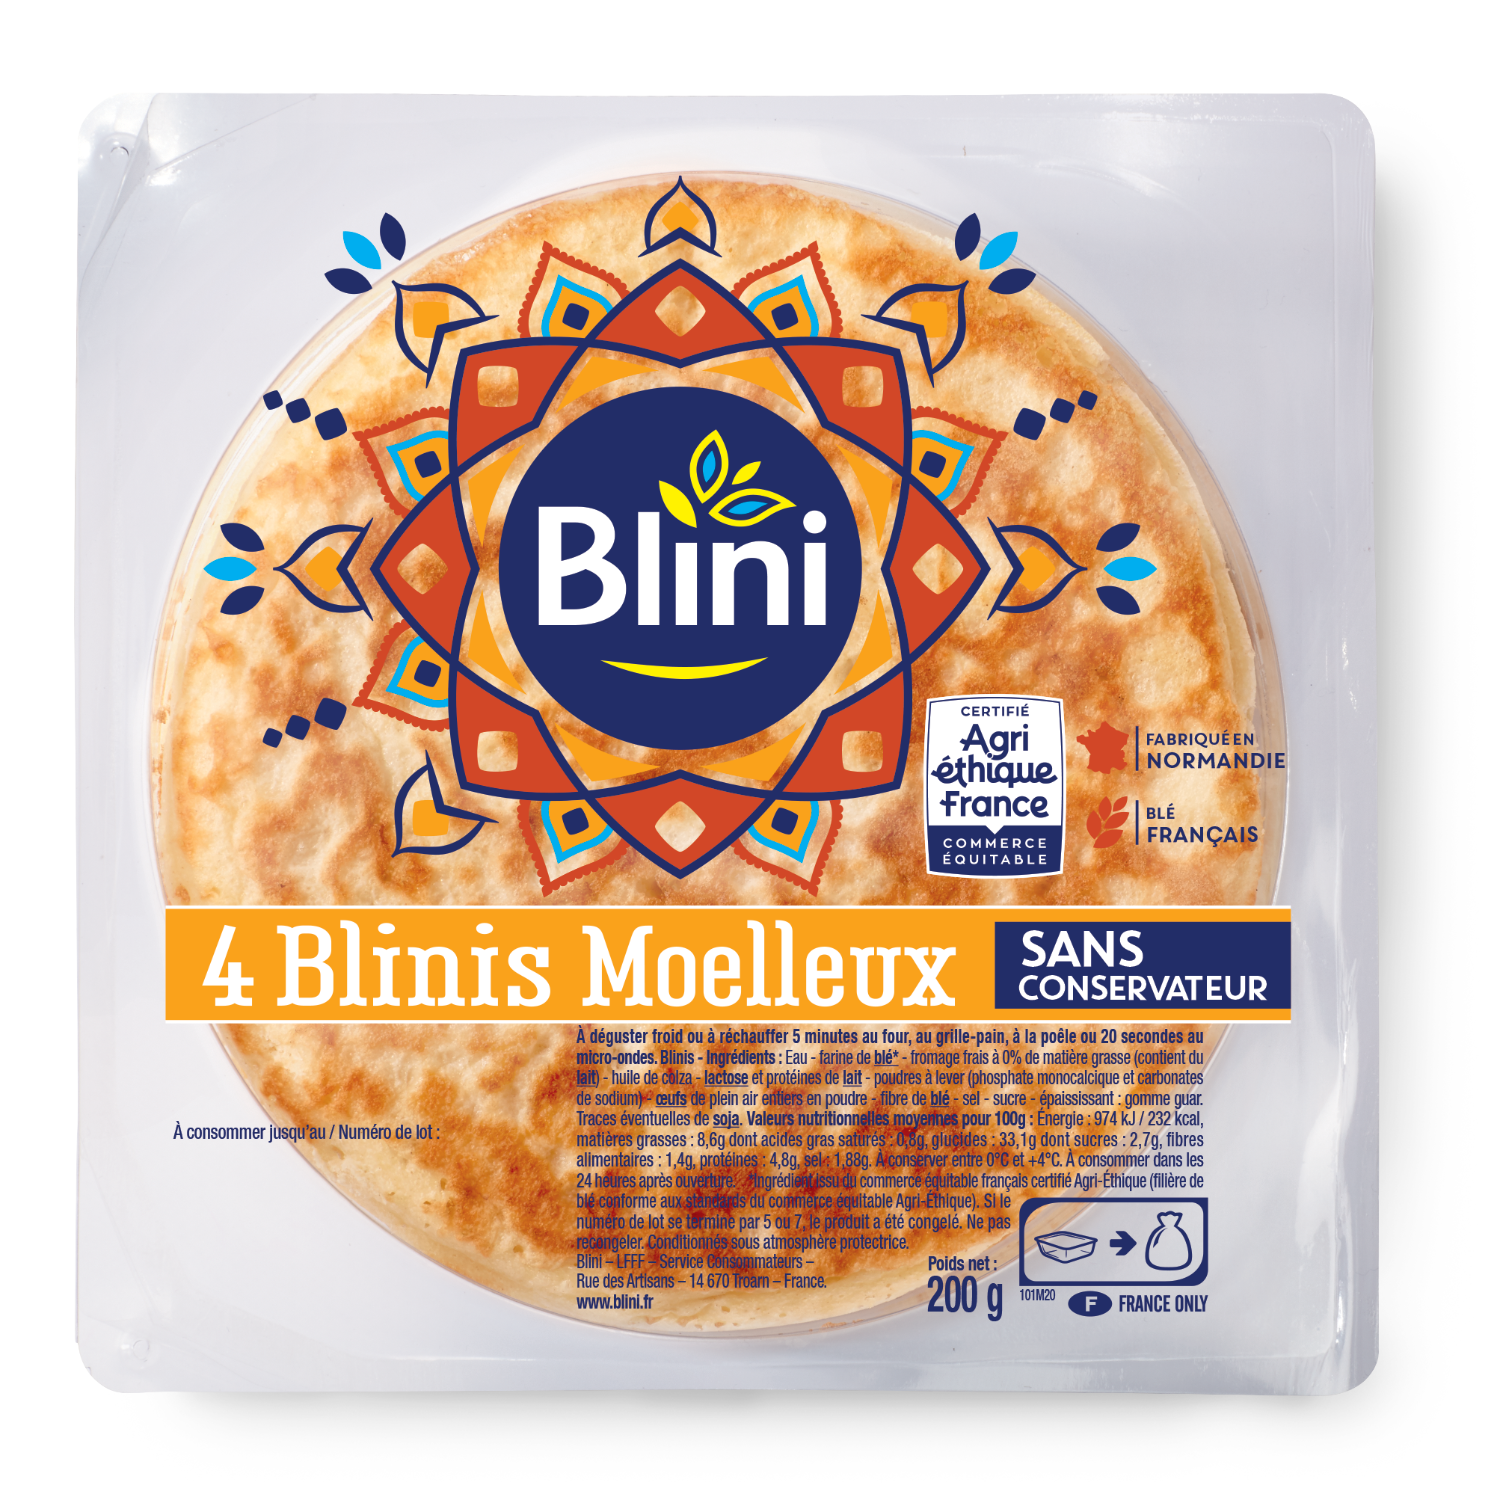 4 Blinis Moelleux